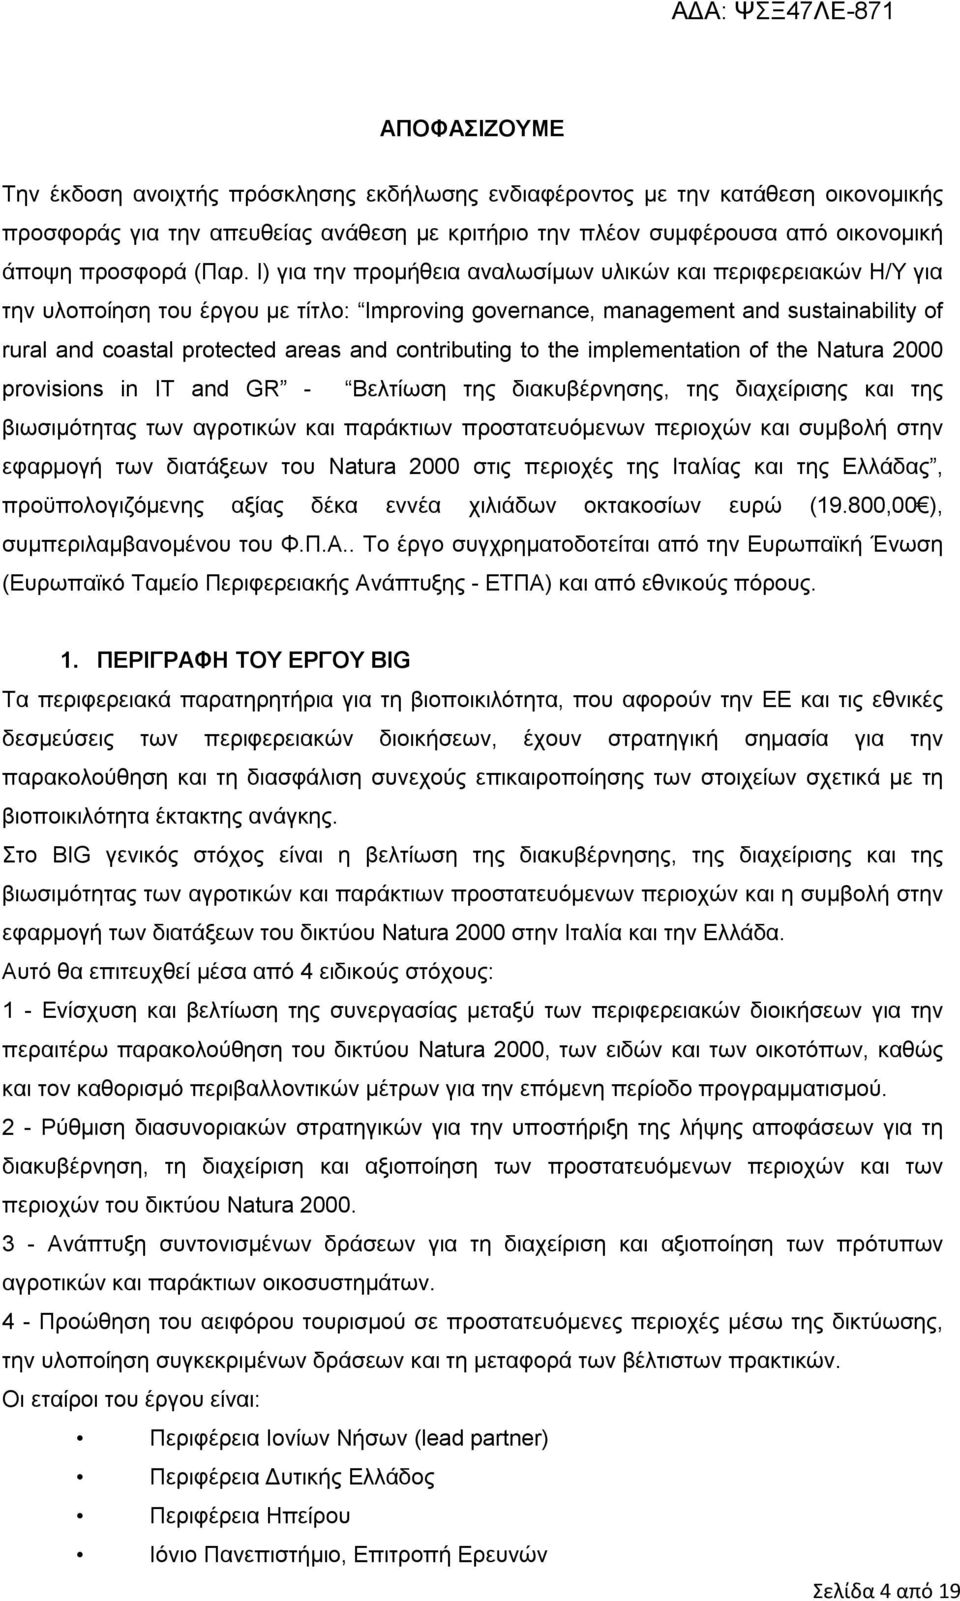 contributing to the implementation of the Natura 2000 provisions in IT and GR - Βελτίωση της διακυβέρνησης, της διαχείρισης και της βιωσιμότητας των αγροτικών και παράκτιων προστατευόμενων περιοχών